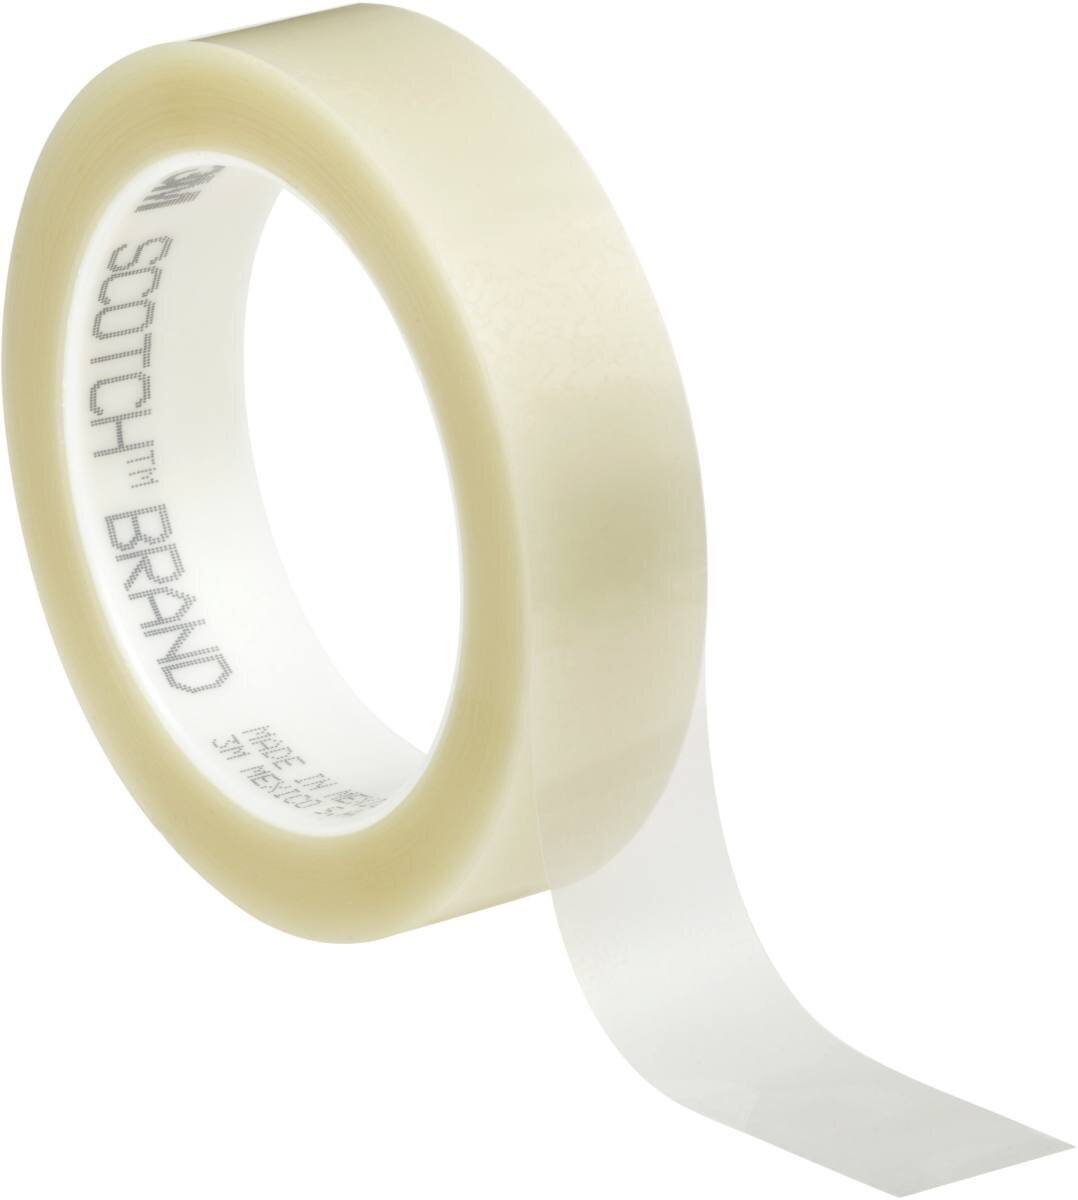 3M Polyester adhesive tape 853, transparent, 6 mm x 66 m, 0.06 mm